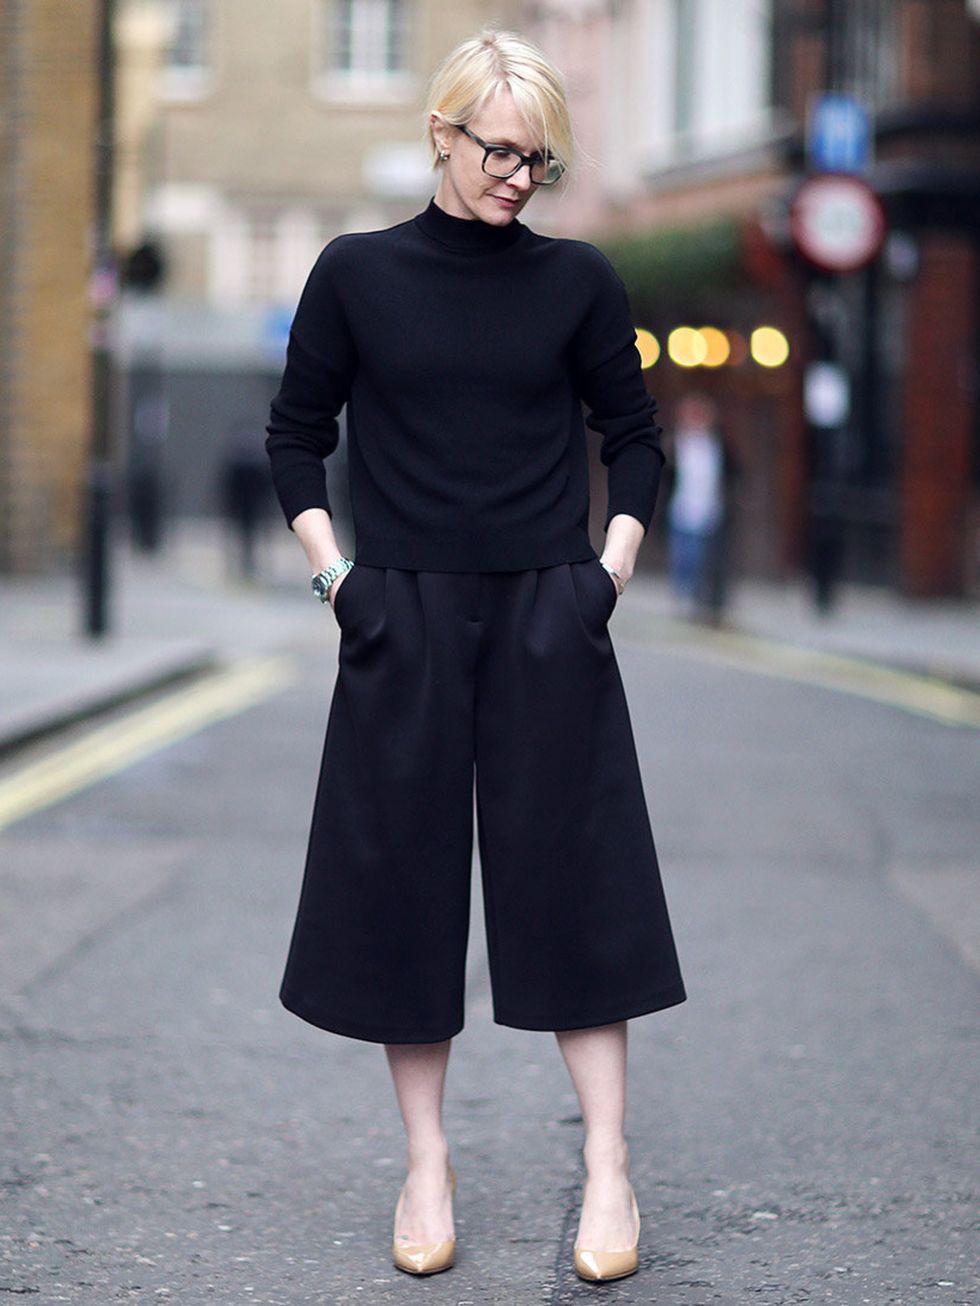 <p><strong>Lorraine Candy - Editor-in-Chief</strong></p><p><a href="http://www.topshop.com/en/tsuk/product/pleat-front-satin-culottes-2705404">Topshop</a> Culottes £30 , <a href="http://www.jimmychoo.com/en/women/shoes/pumps/abel/black-patent-leather-poin